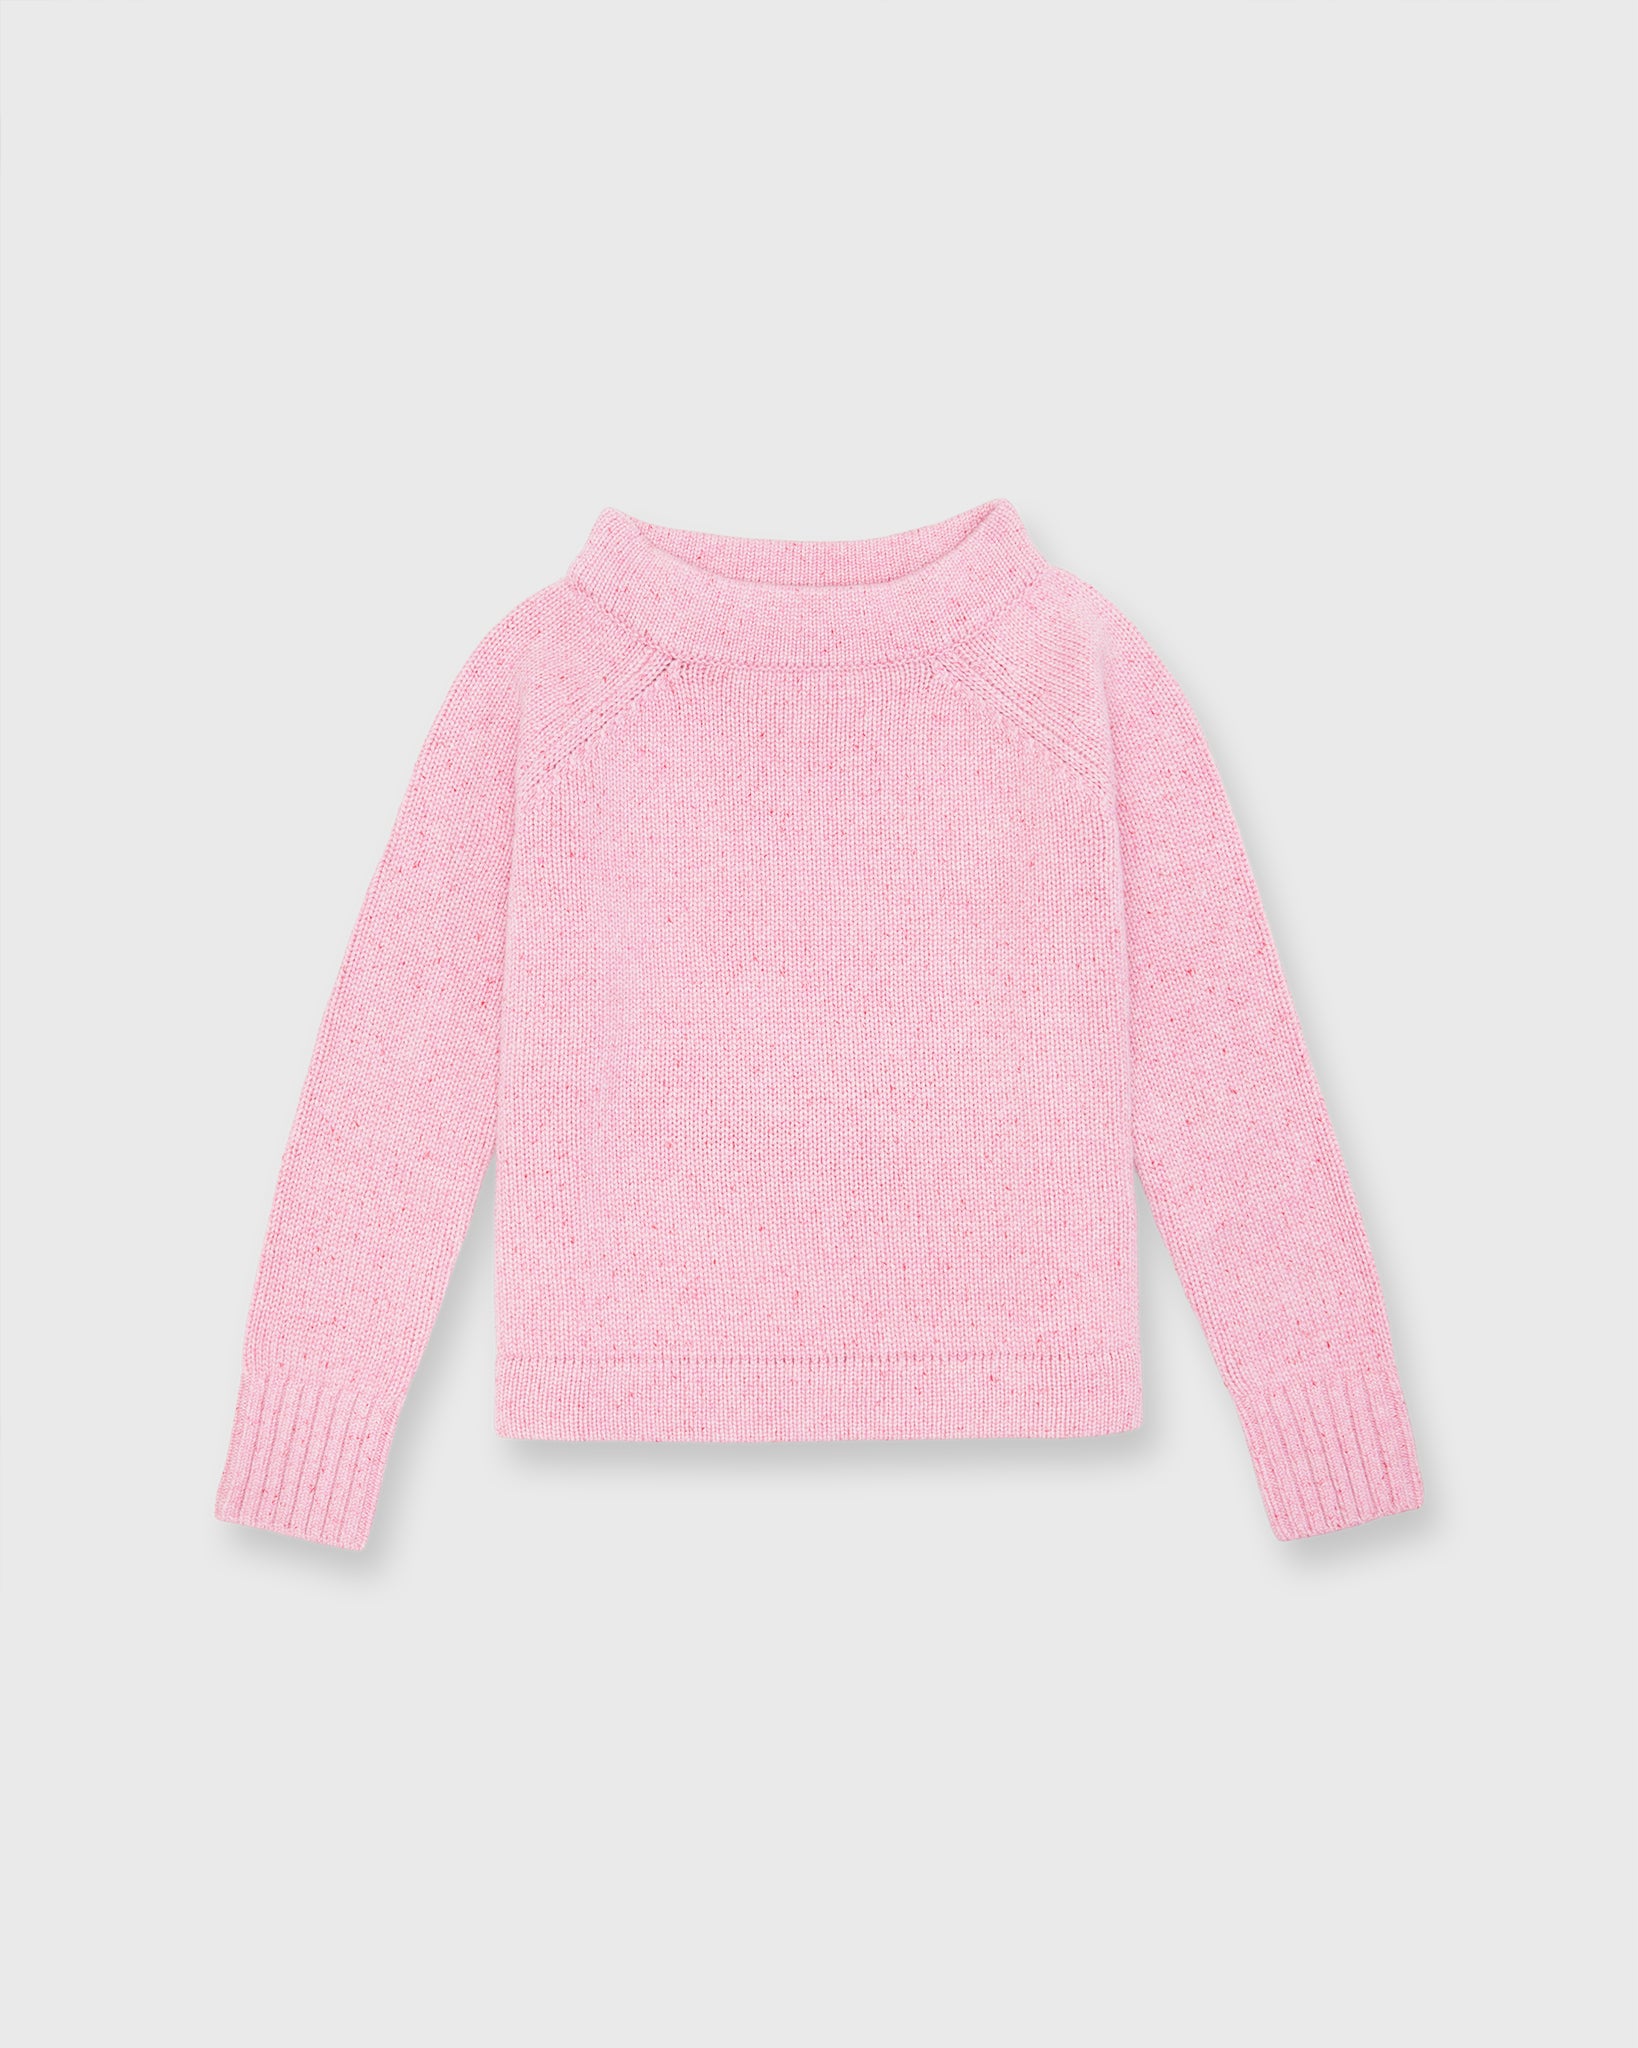 Golightly Sweater in Pink Donegal Cashmere | Shop Ann Mashburn